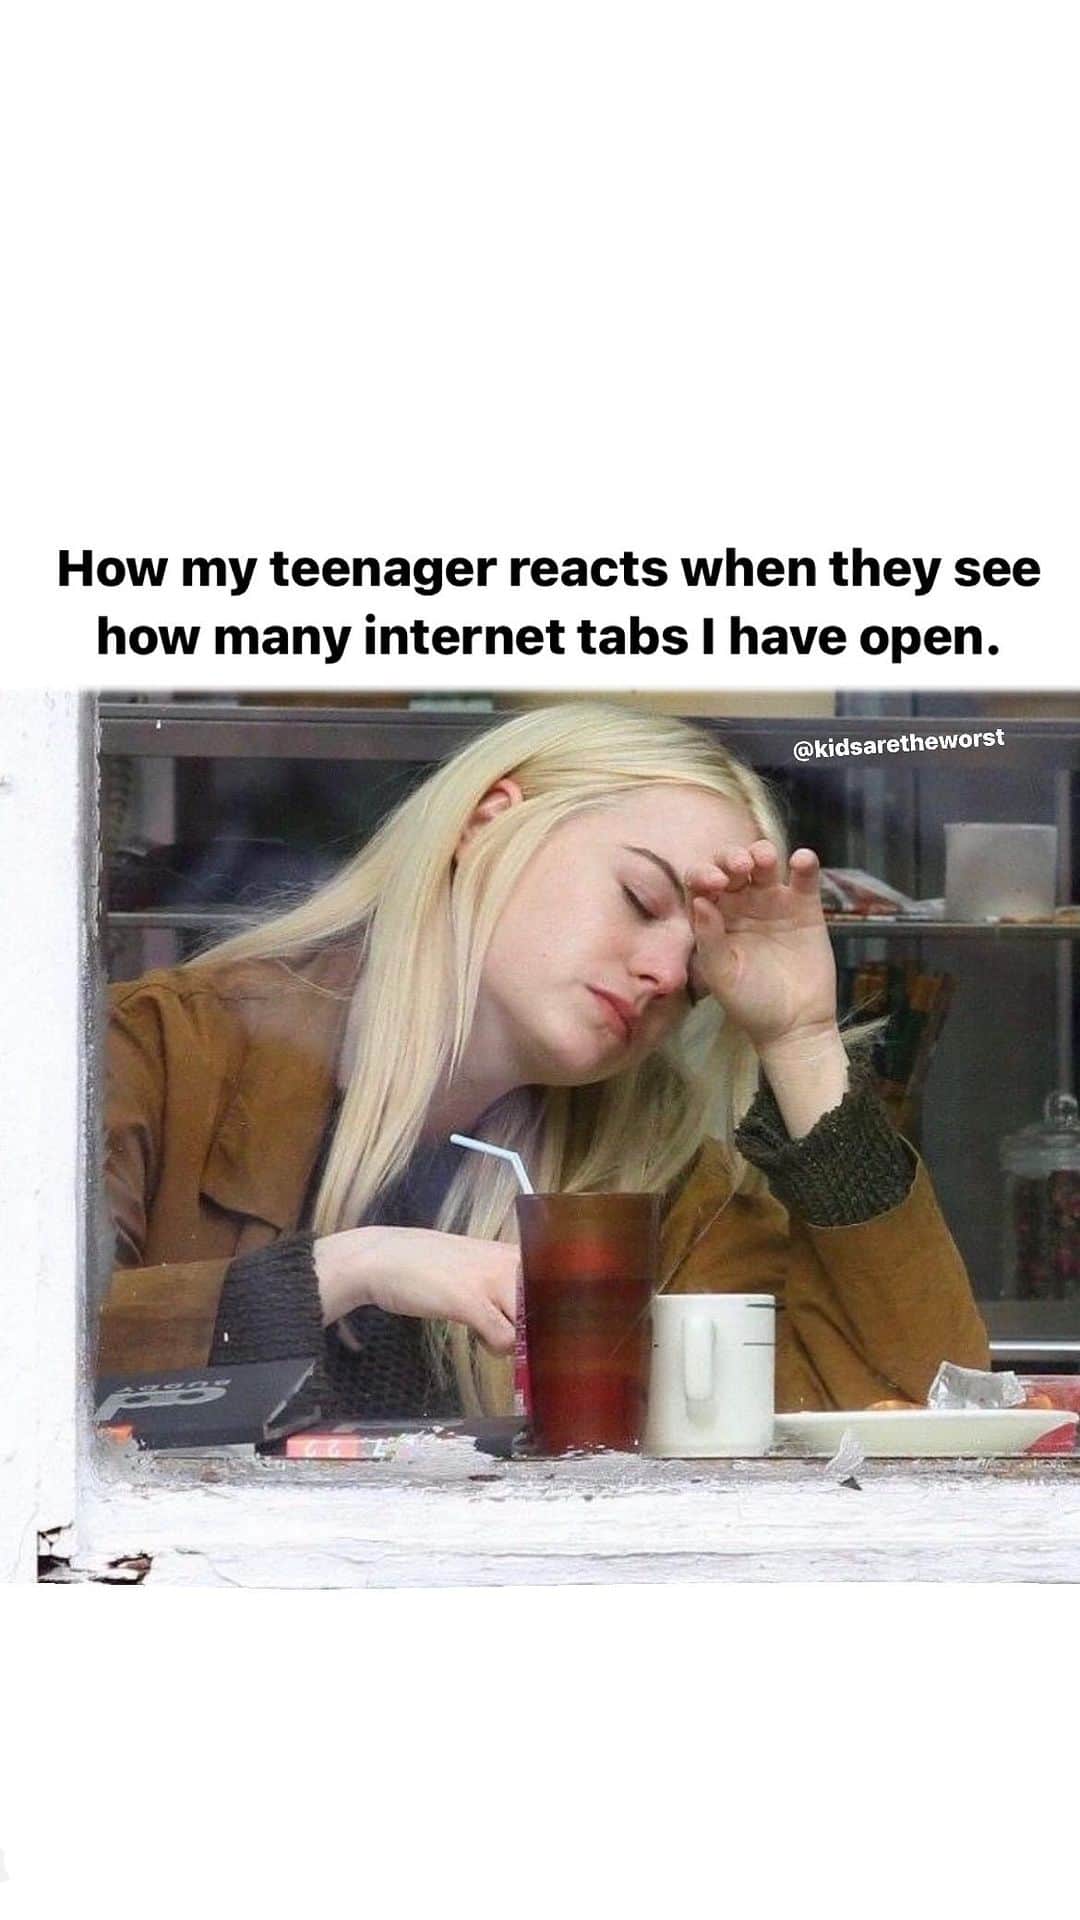 Kids Are the Worstのインスタグラム：「On my own phone! The audacity I must have to ruin someone else’s day like that!   I have a lot of nerve keeping tabs open the way I do.  You wouldn’t do this, would you? How many tabs are open on your internet browser right now?  #kidsaretheworst」